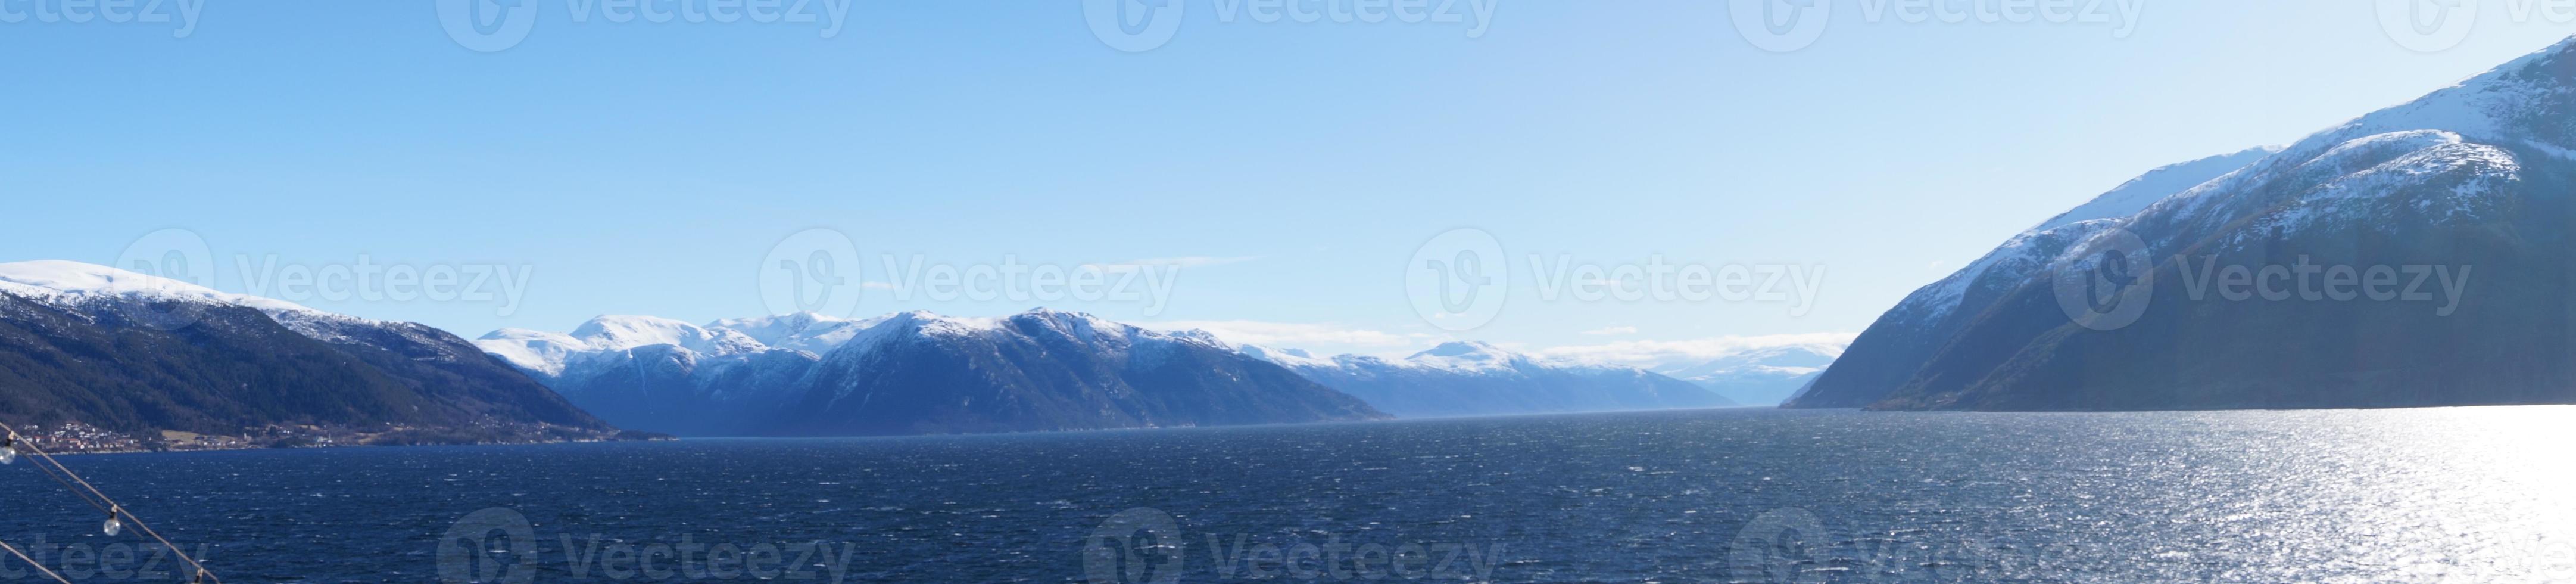 Sognefjord in Norway photo